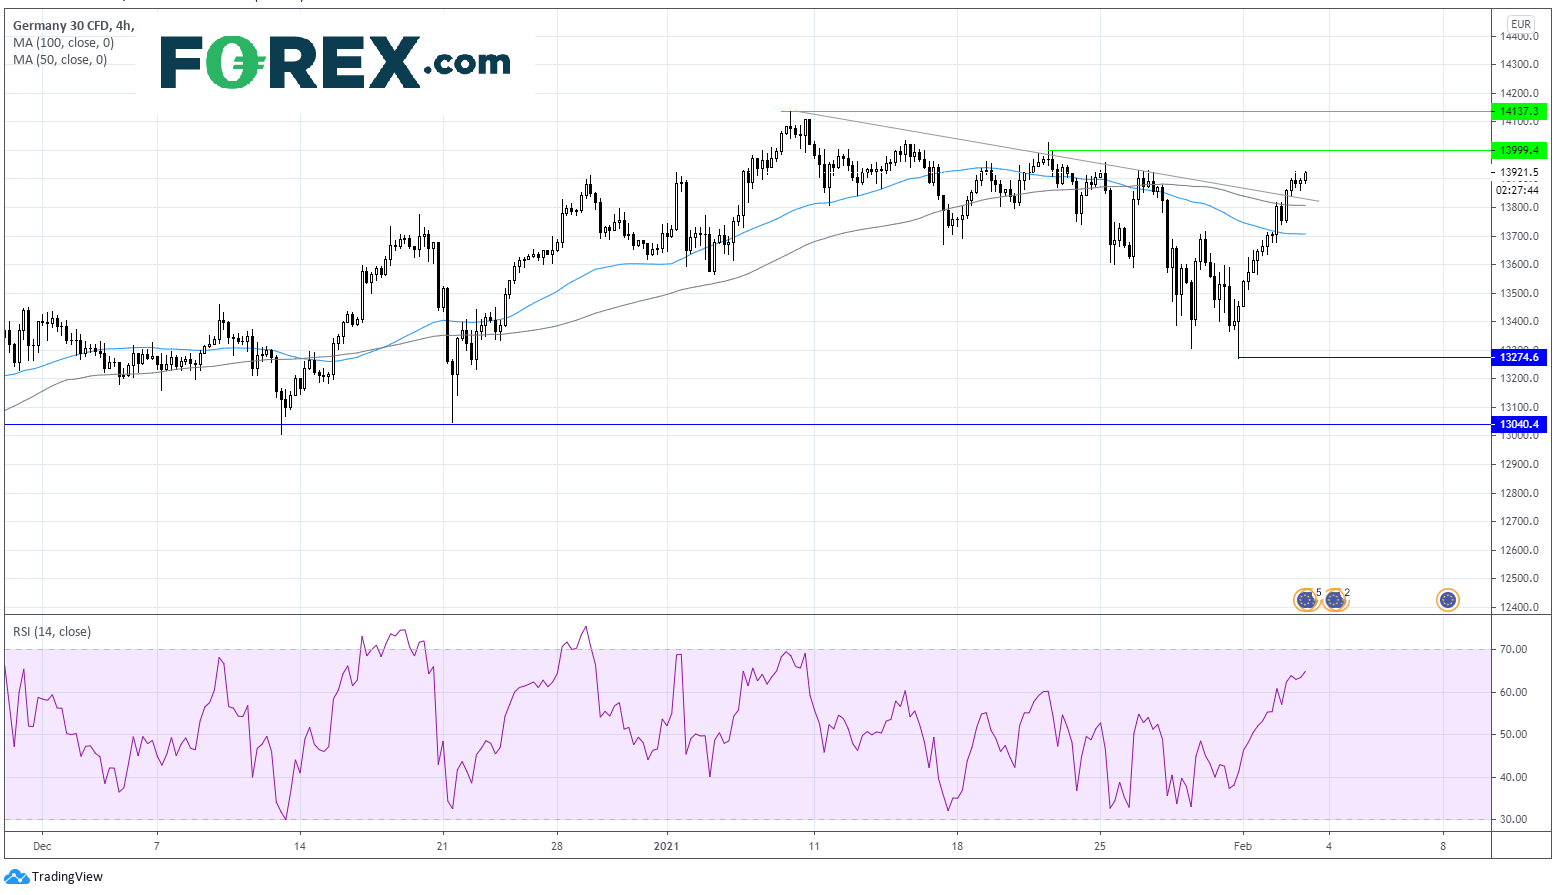 Chart analysis of the Germany DAX 30 . Published in February 2021 by FOREX.com